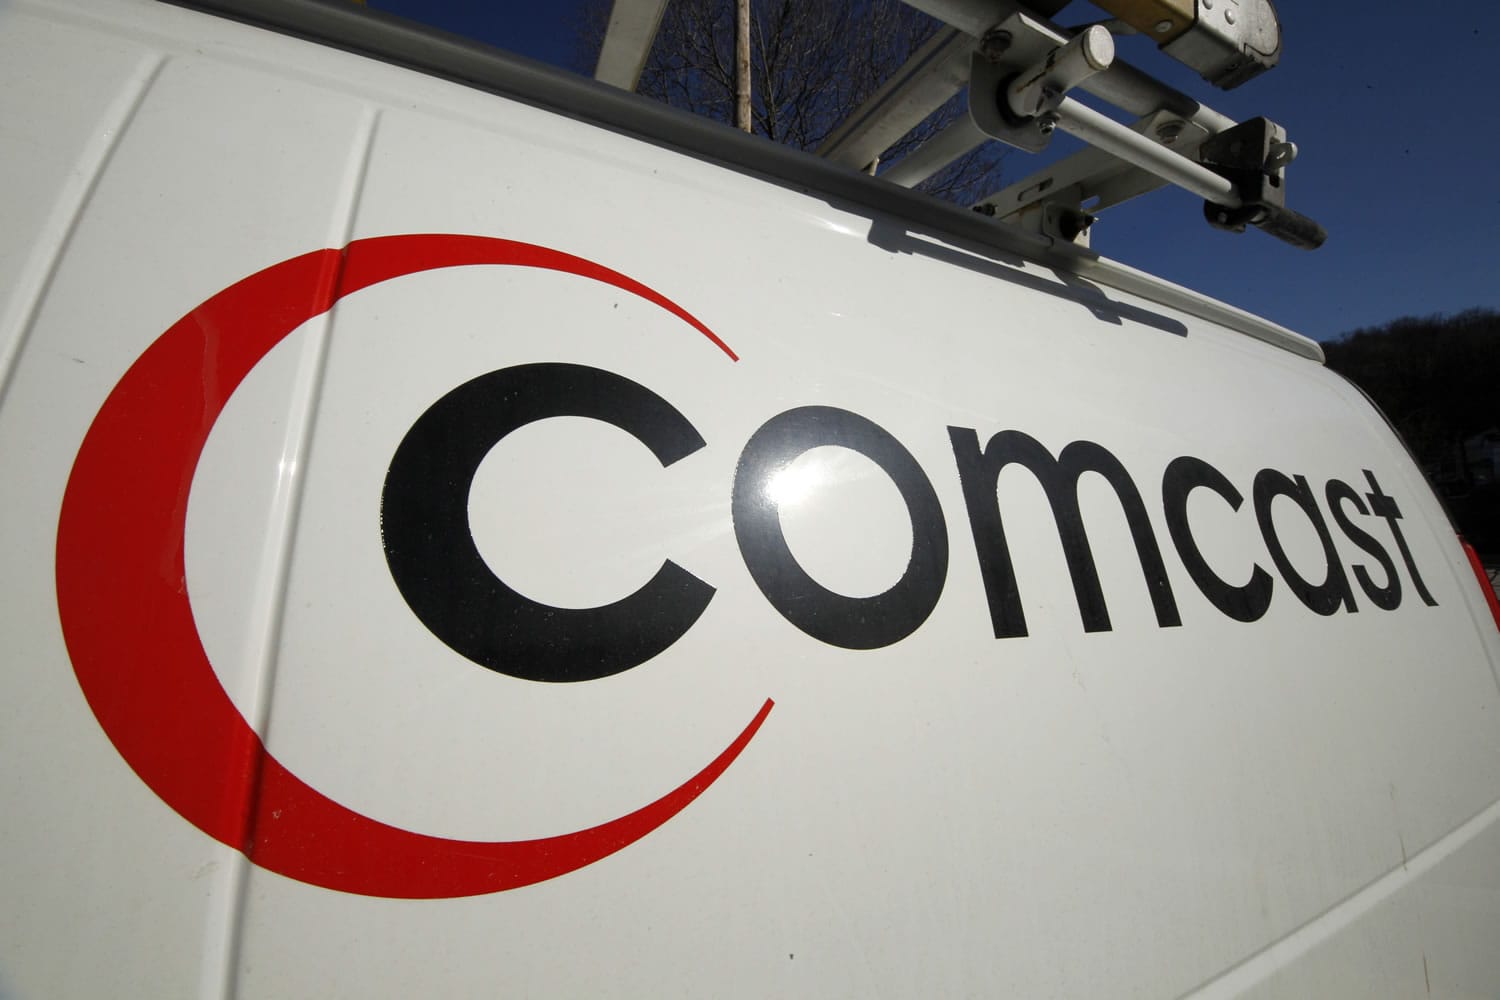 Comcast has agreed to buy Time Warner Cable for $45.2 billion in stock, or $158.82 per share, in a deal that would combine the top two cable TV companies in the nation.